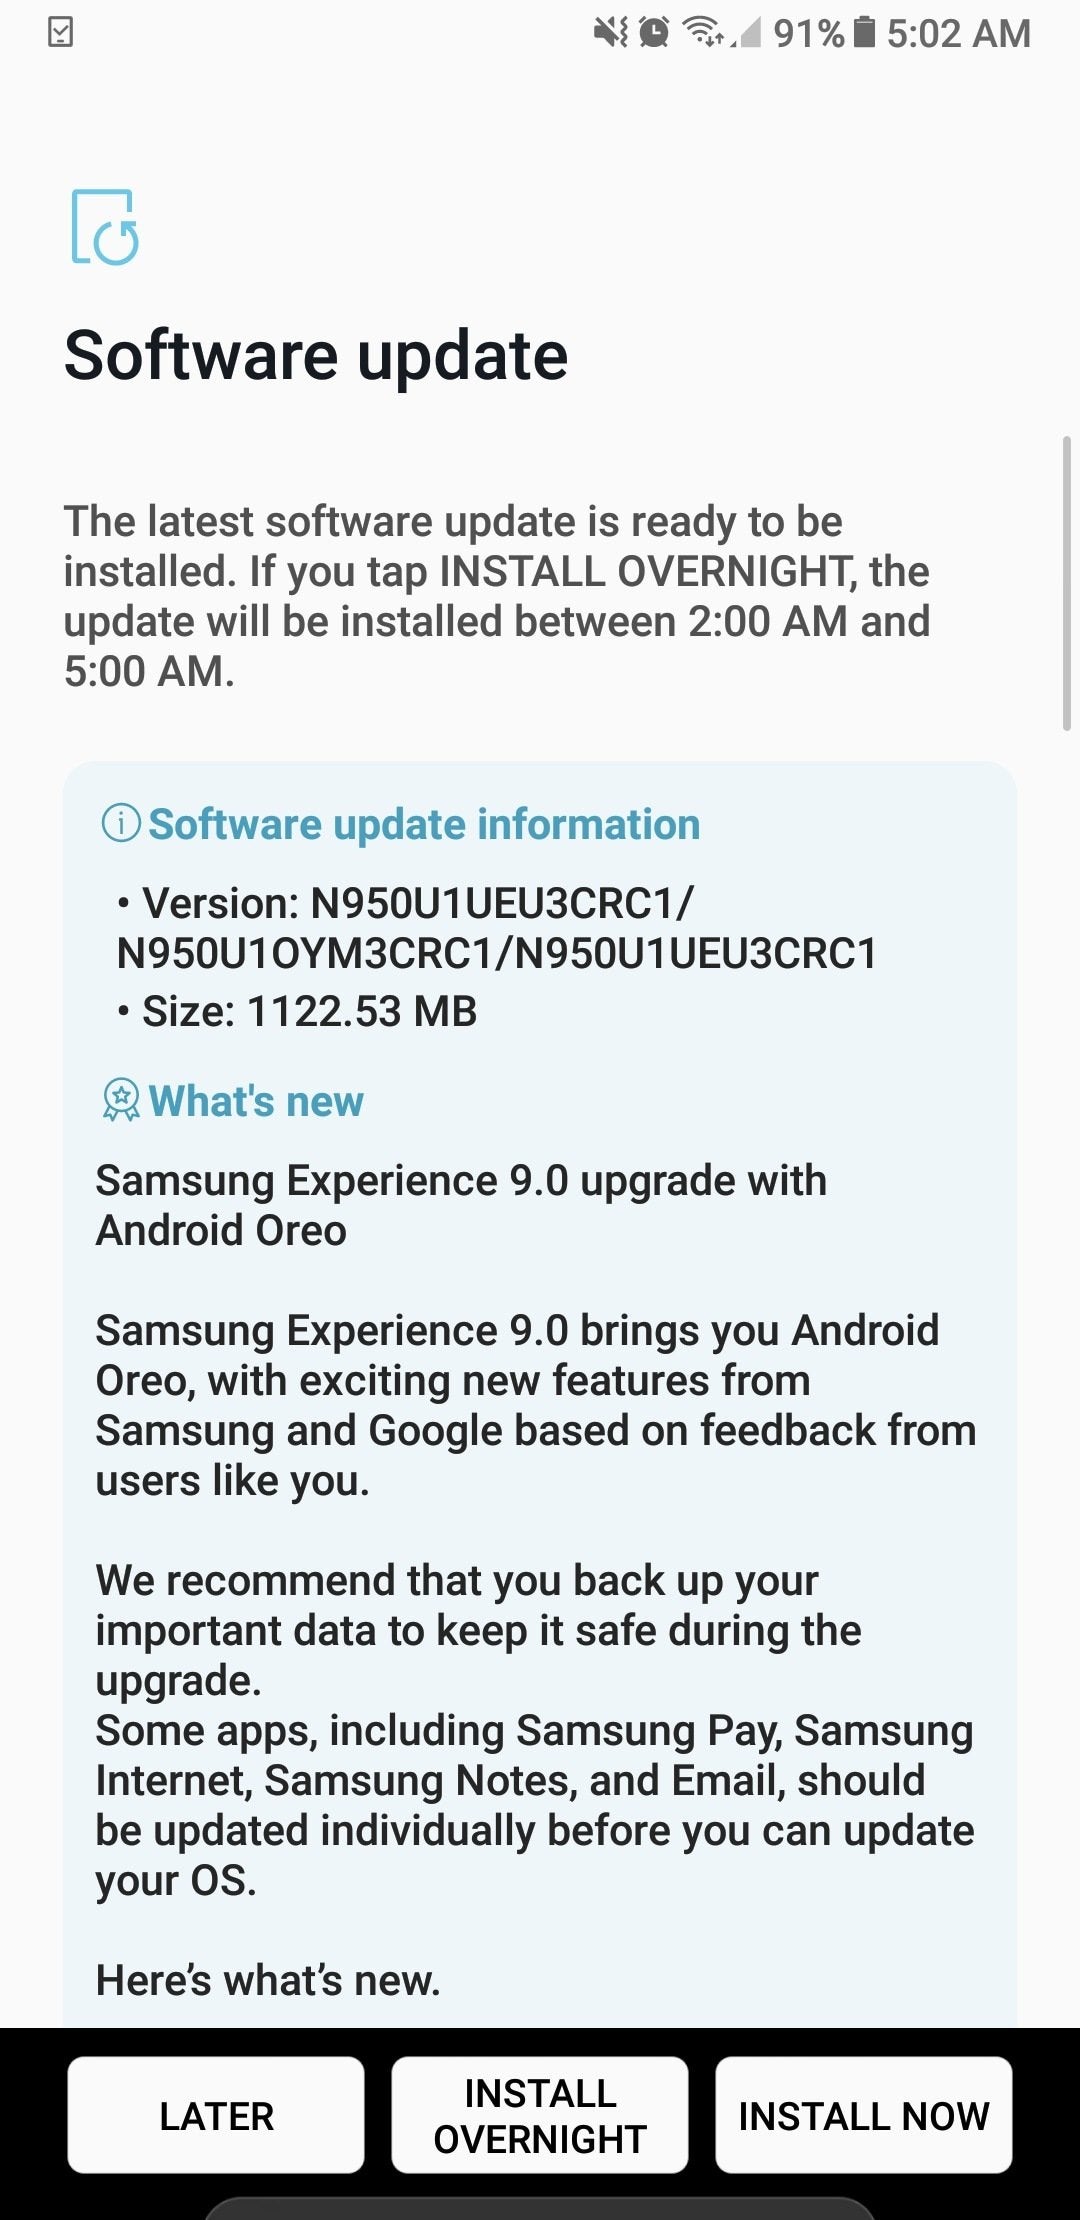 Unlocked Samsung Galaxy Note 8 is the last to receive Android 8.0 Oreo in the US